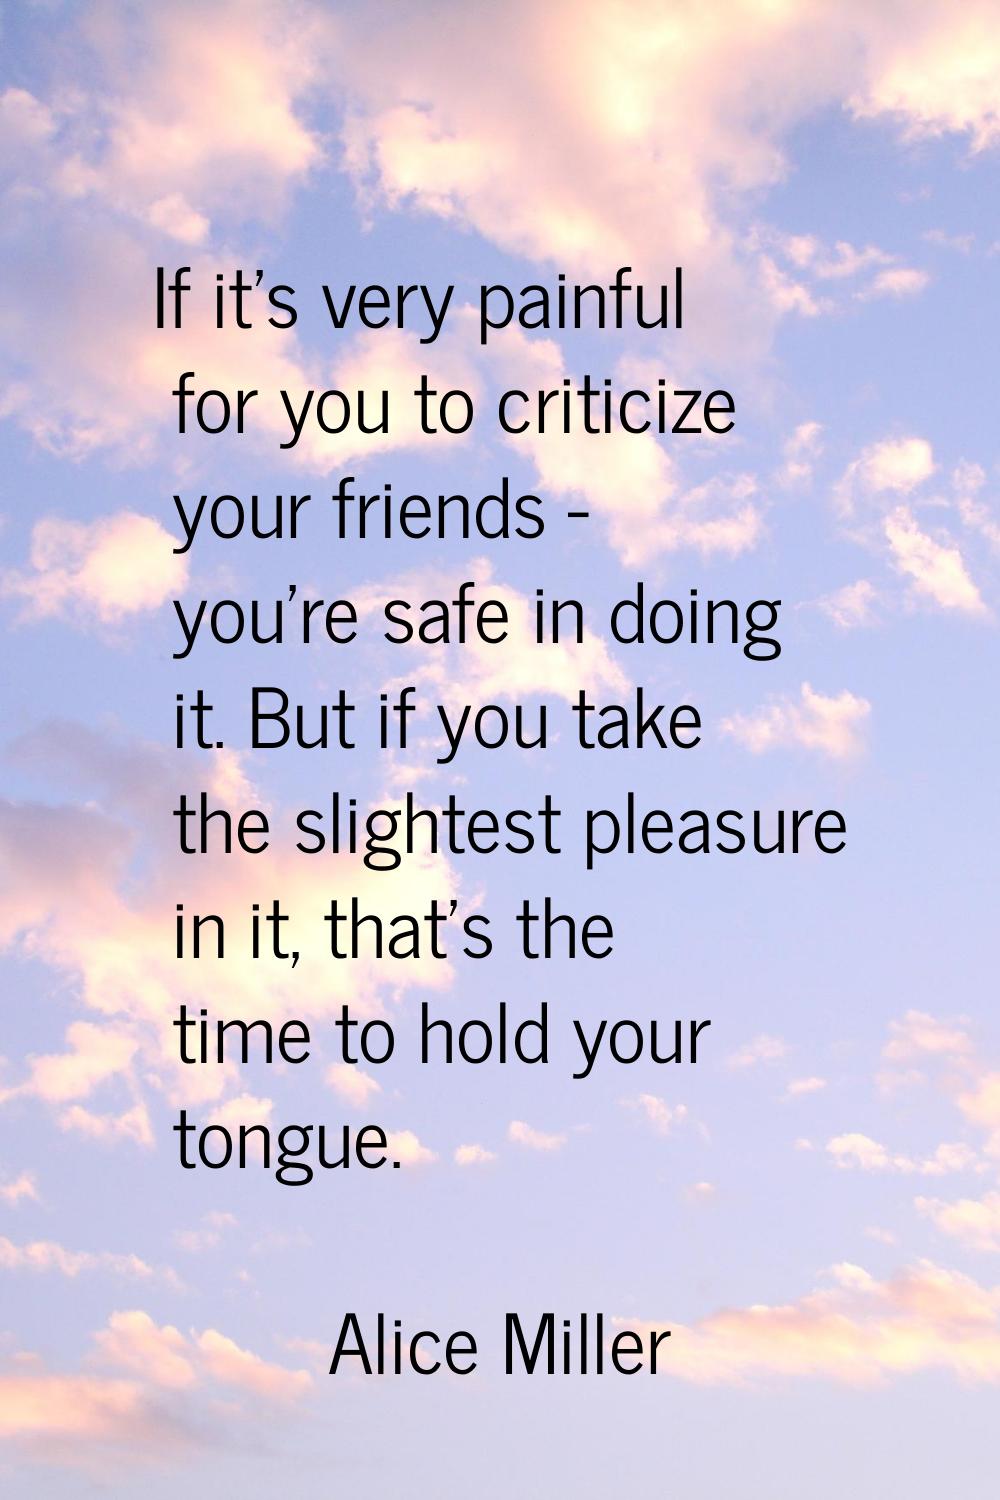 If it's very painful for you to criticize your friends - you're safe in doing it. But if you take t